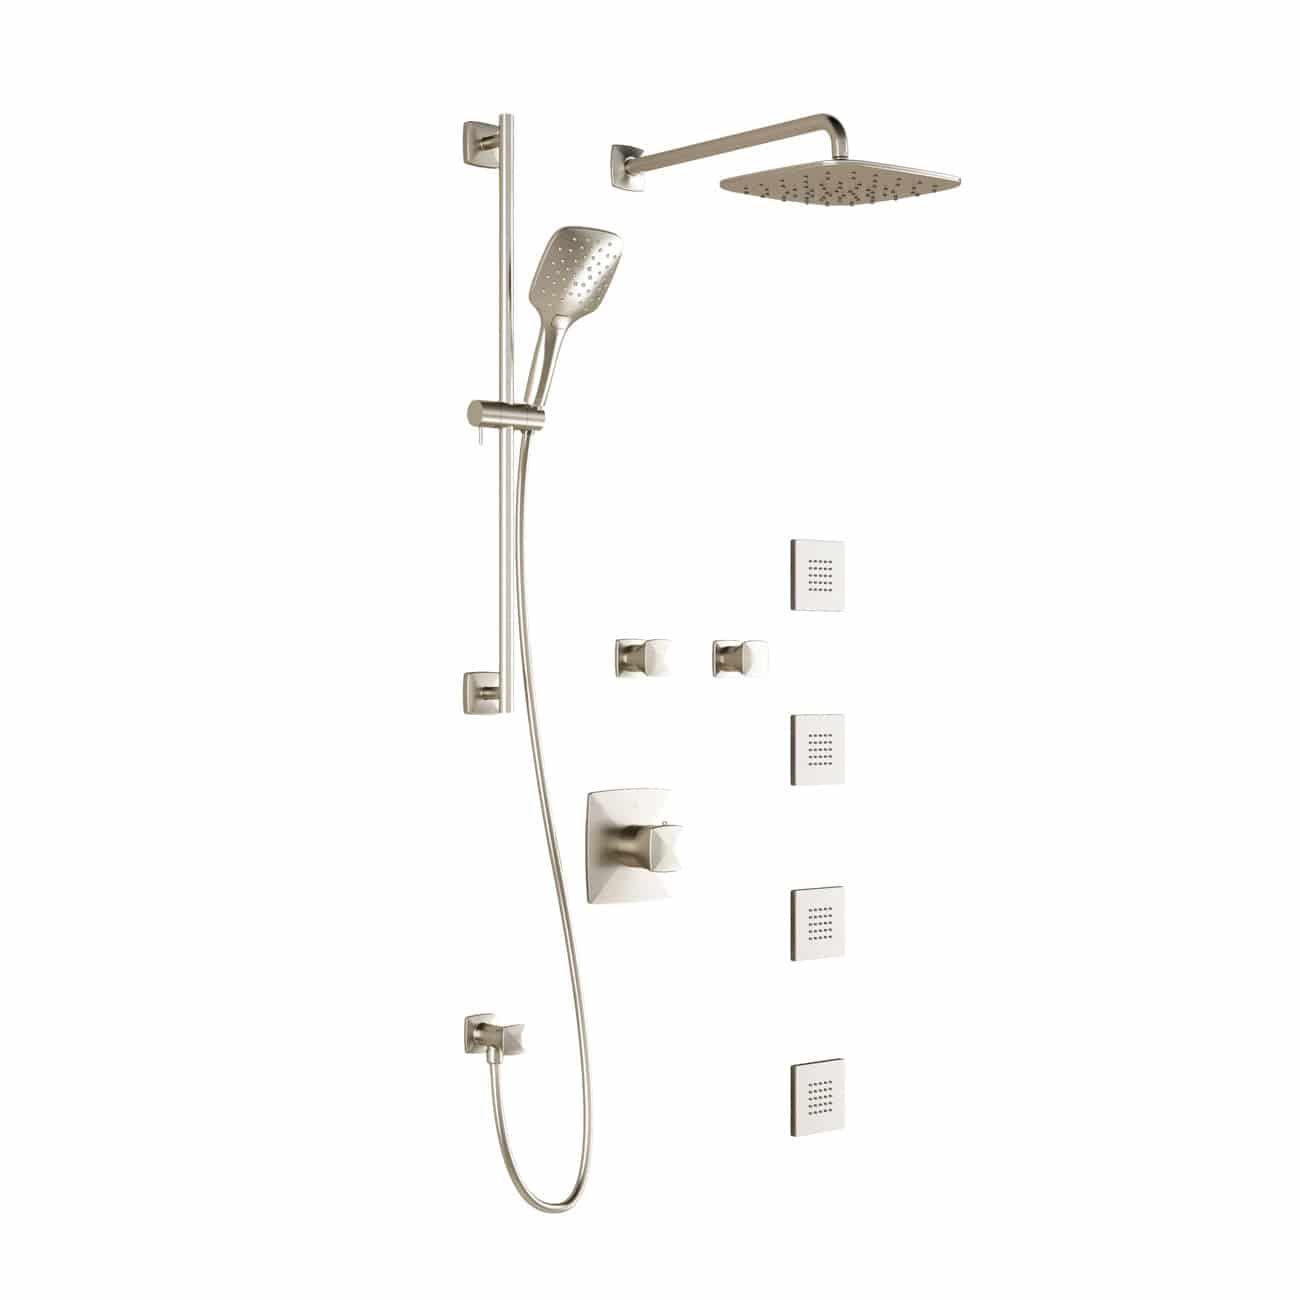 Kalia UMANI T375 PLUS Thermostatic Shower System with Wall Arm and 10" Rain Shower Head- Brushed Nickel PVD